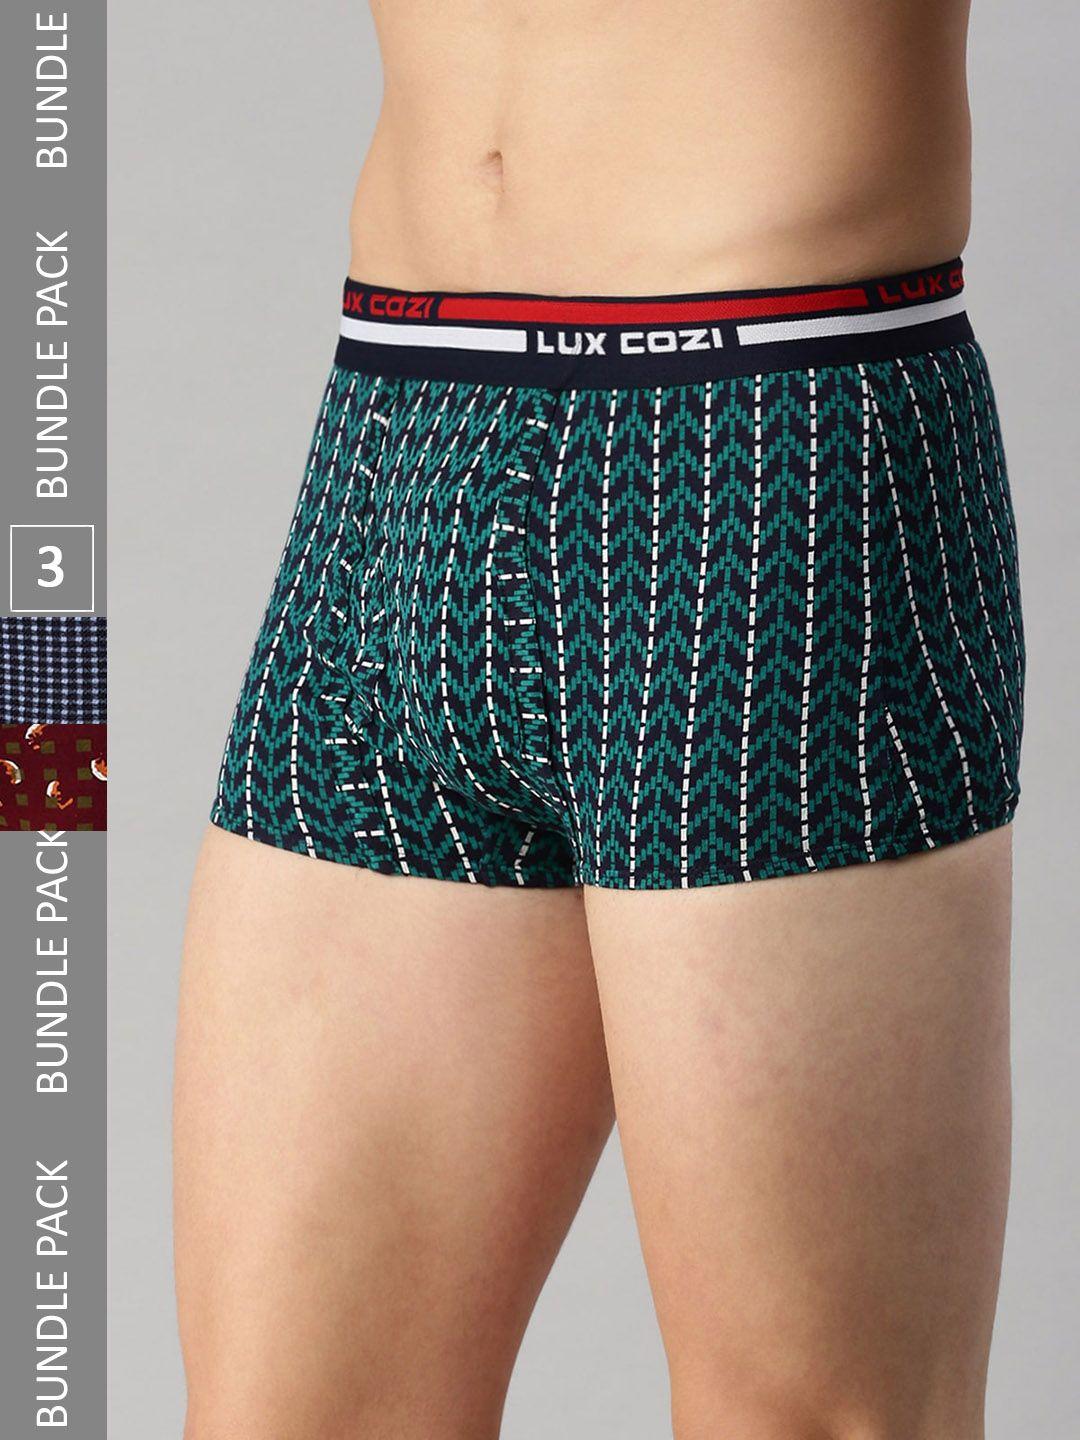 lux cozi men pack of 3 assorted pure cotton trunks- cozi_bigshot_sl_print_oe_ast2_3pc